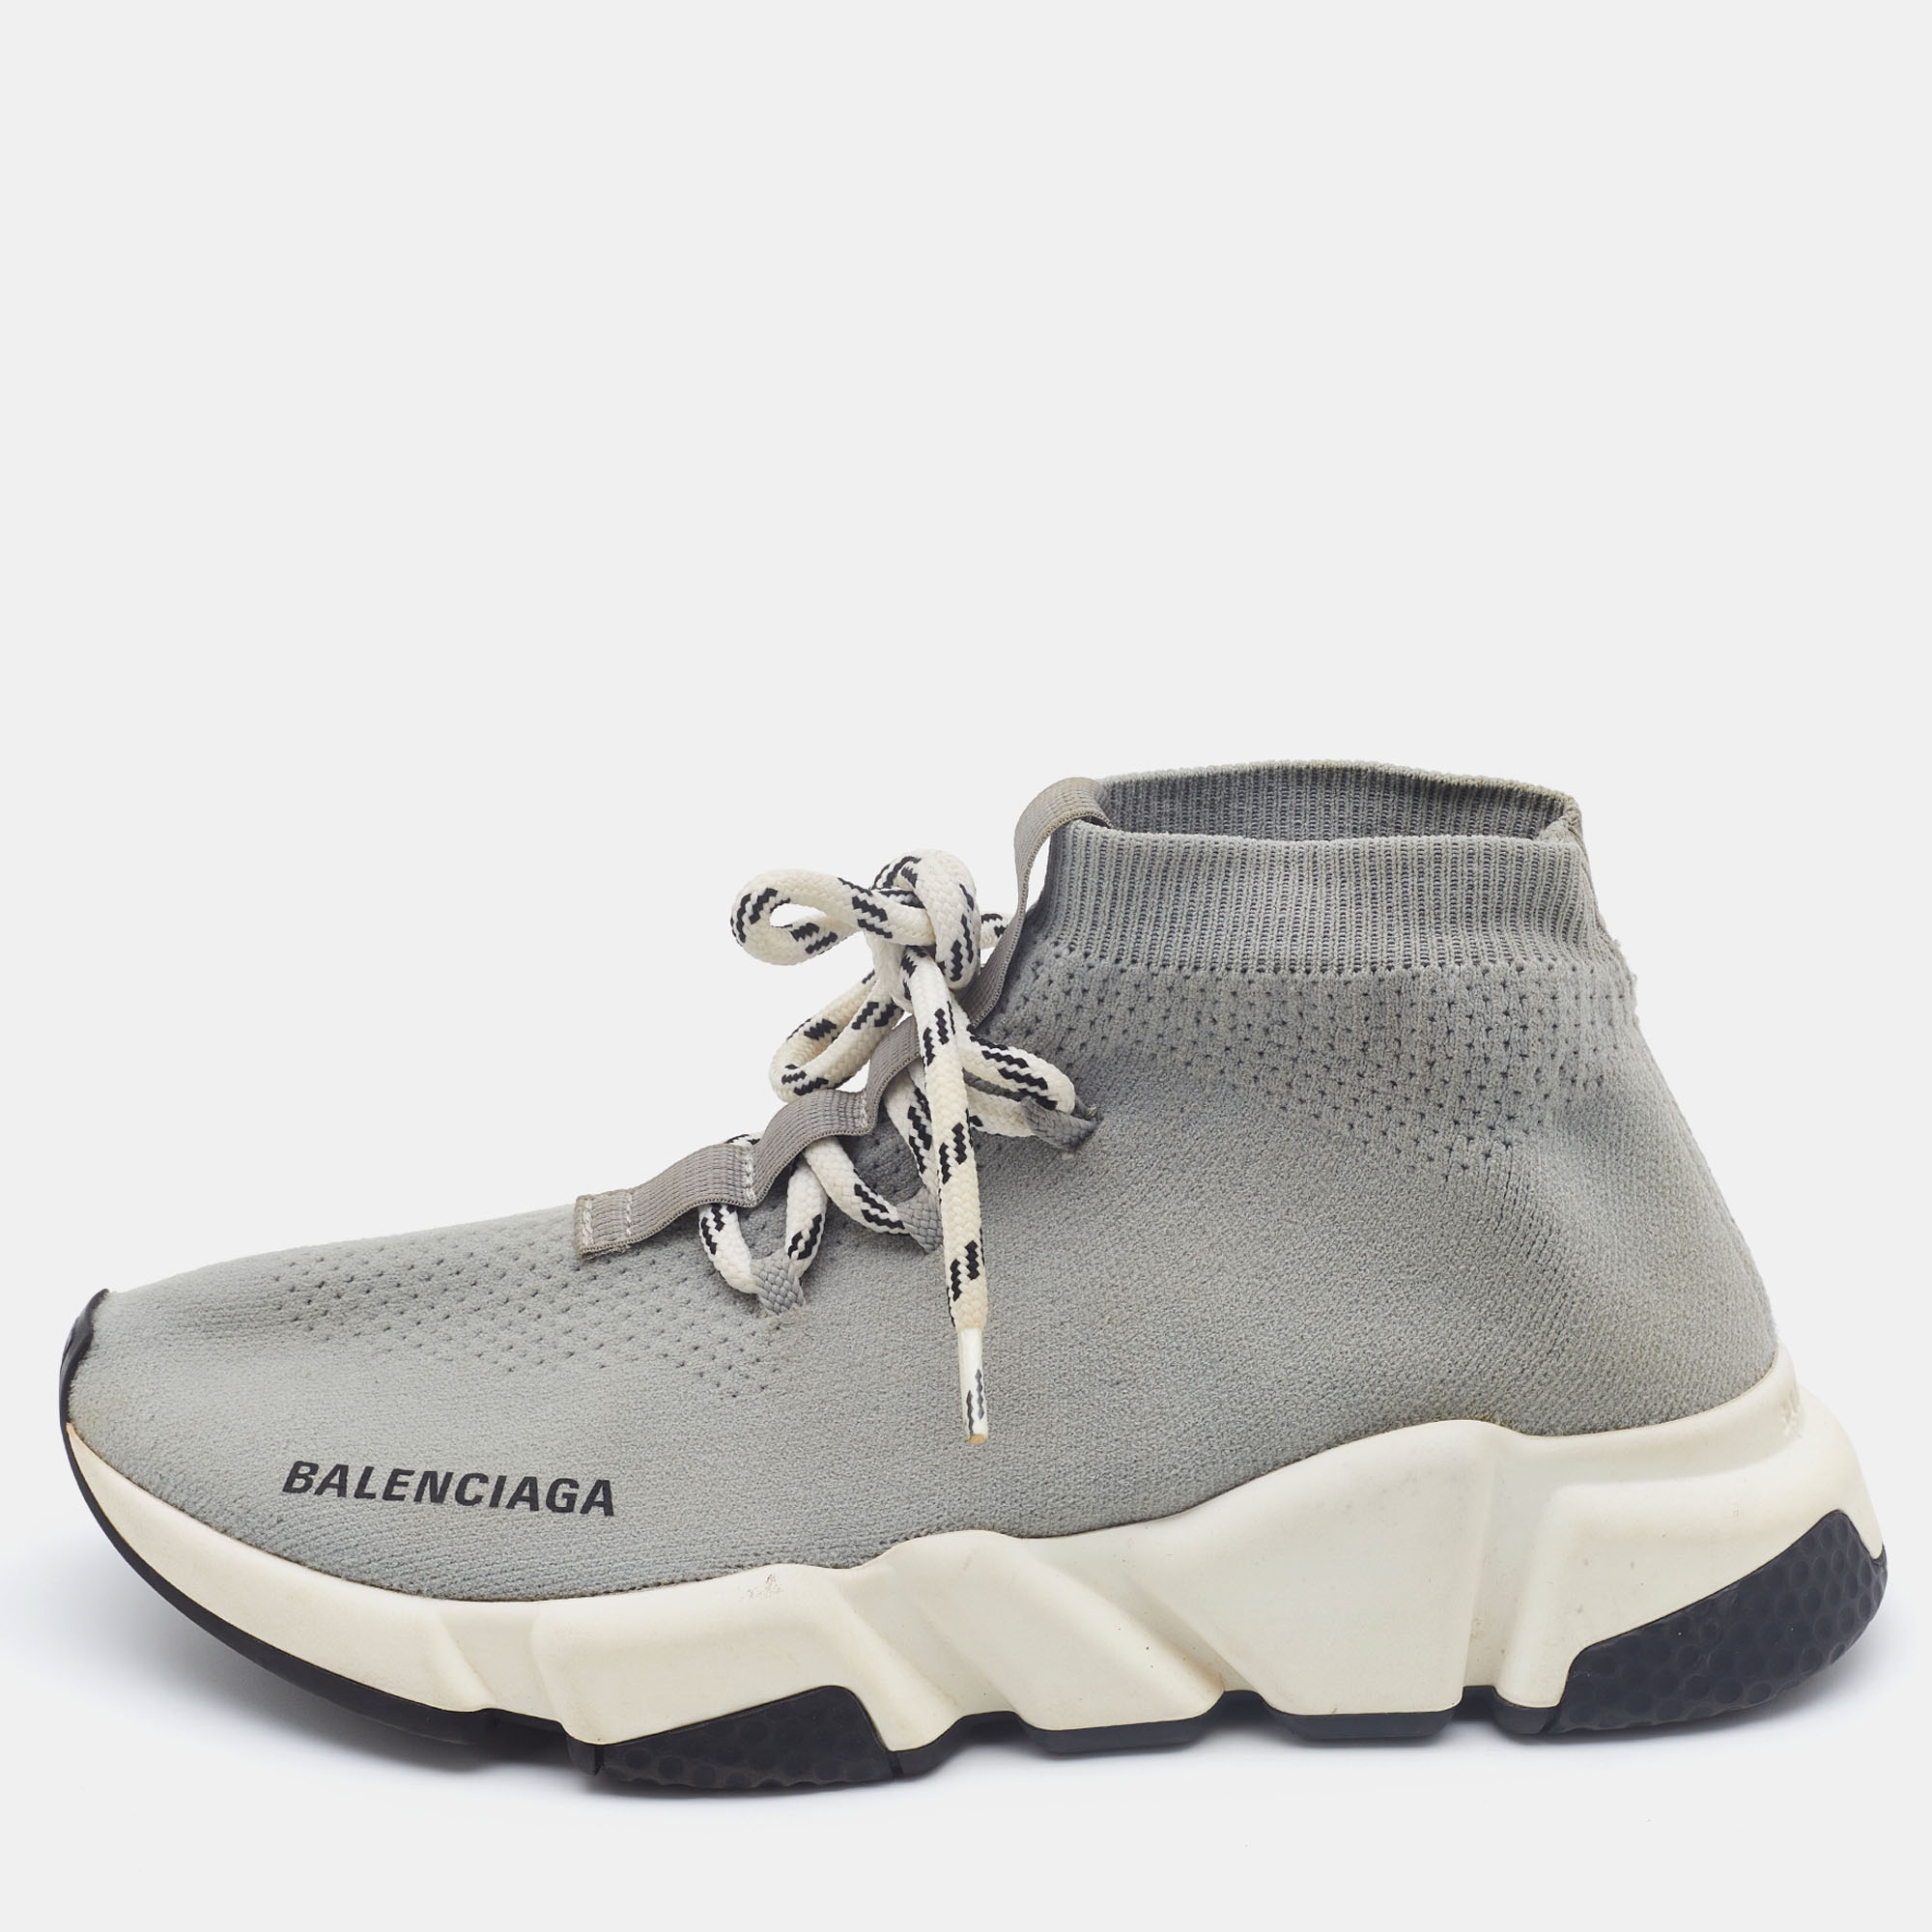 Balenciaga Grey Knit Fabric Speed Trainer Lace Up Sneakers Size 37